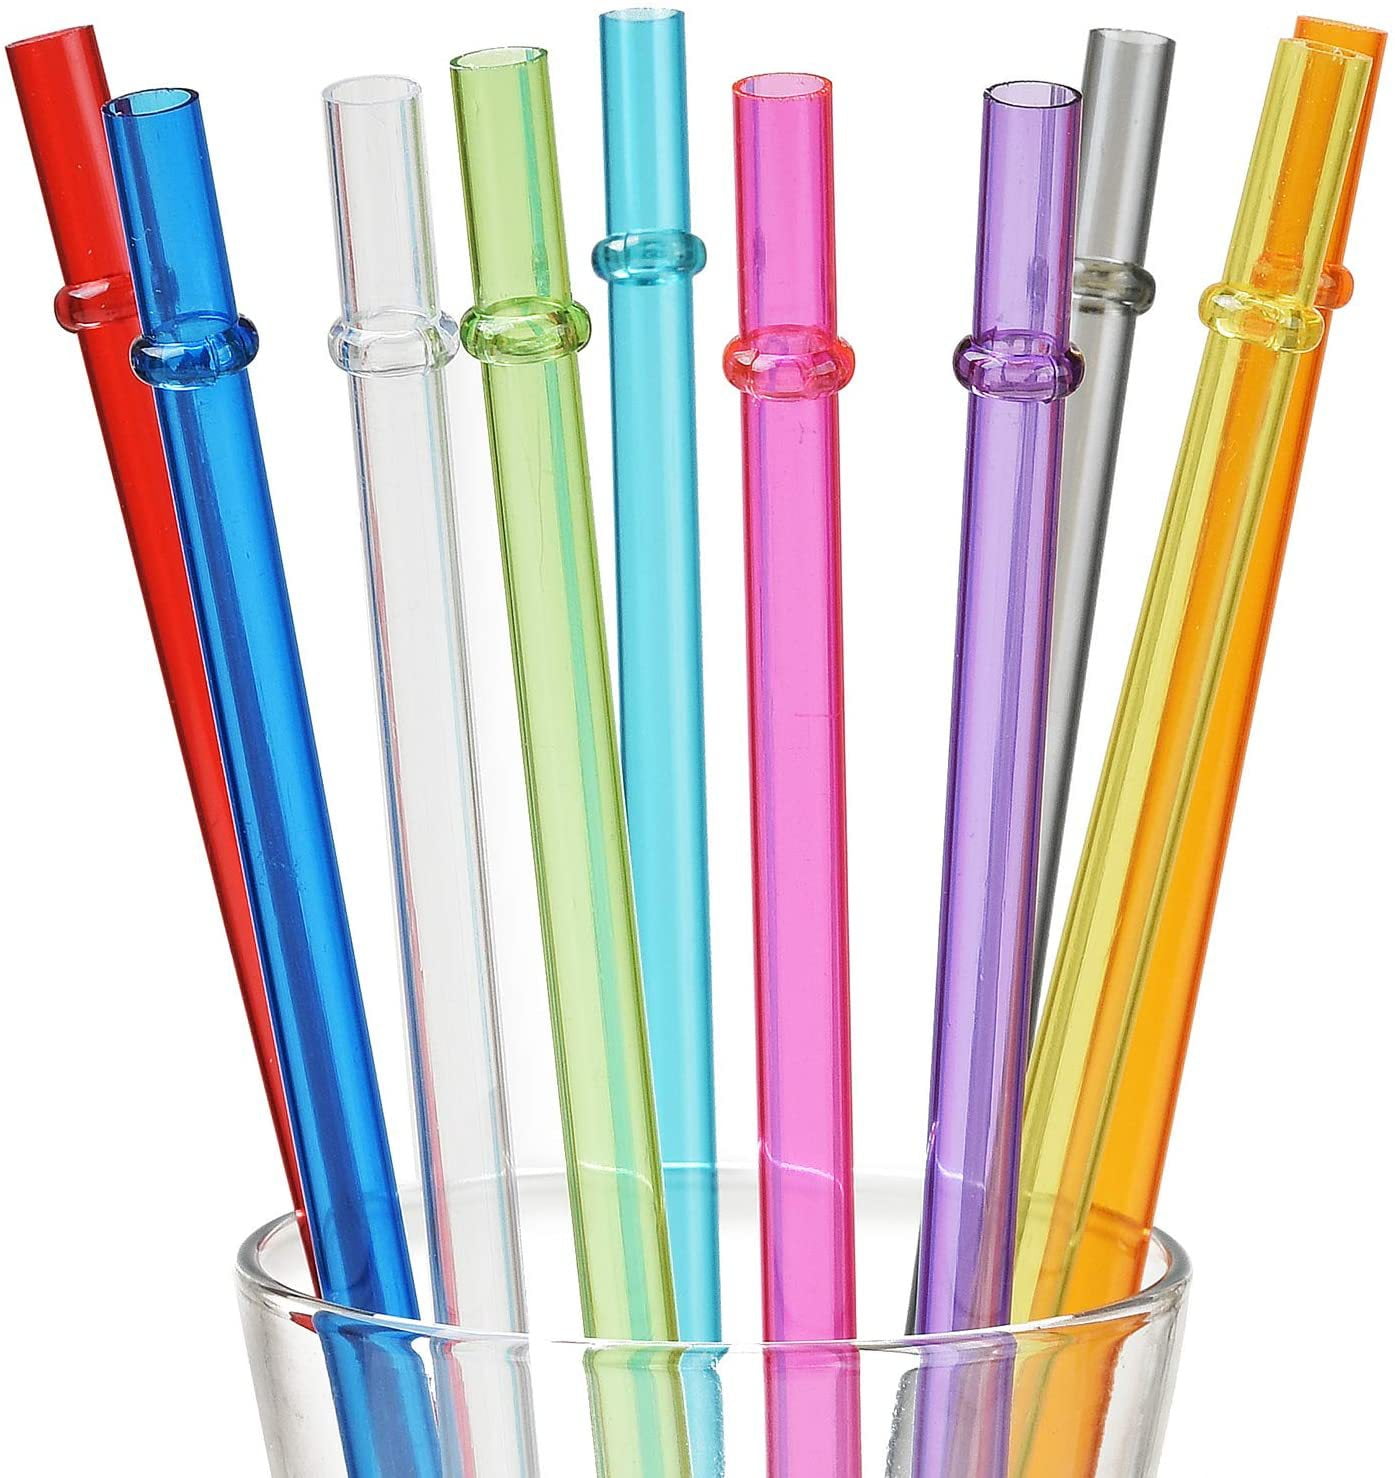 Reusable Stainless Steel Straws -16 Pack 10.5 & 8.5 Reusable Straws with  4 Straw Cleaner Brush and 16 Silicone Tips with 1 Travel Case, Eco Friendly